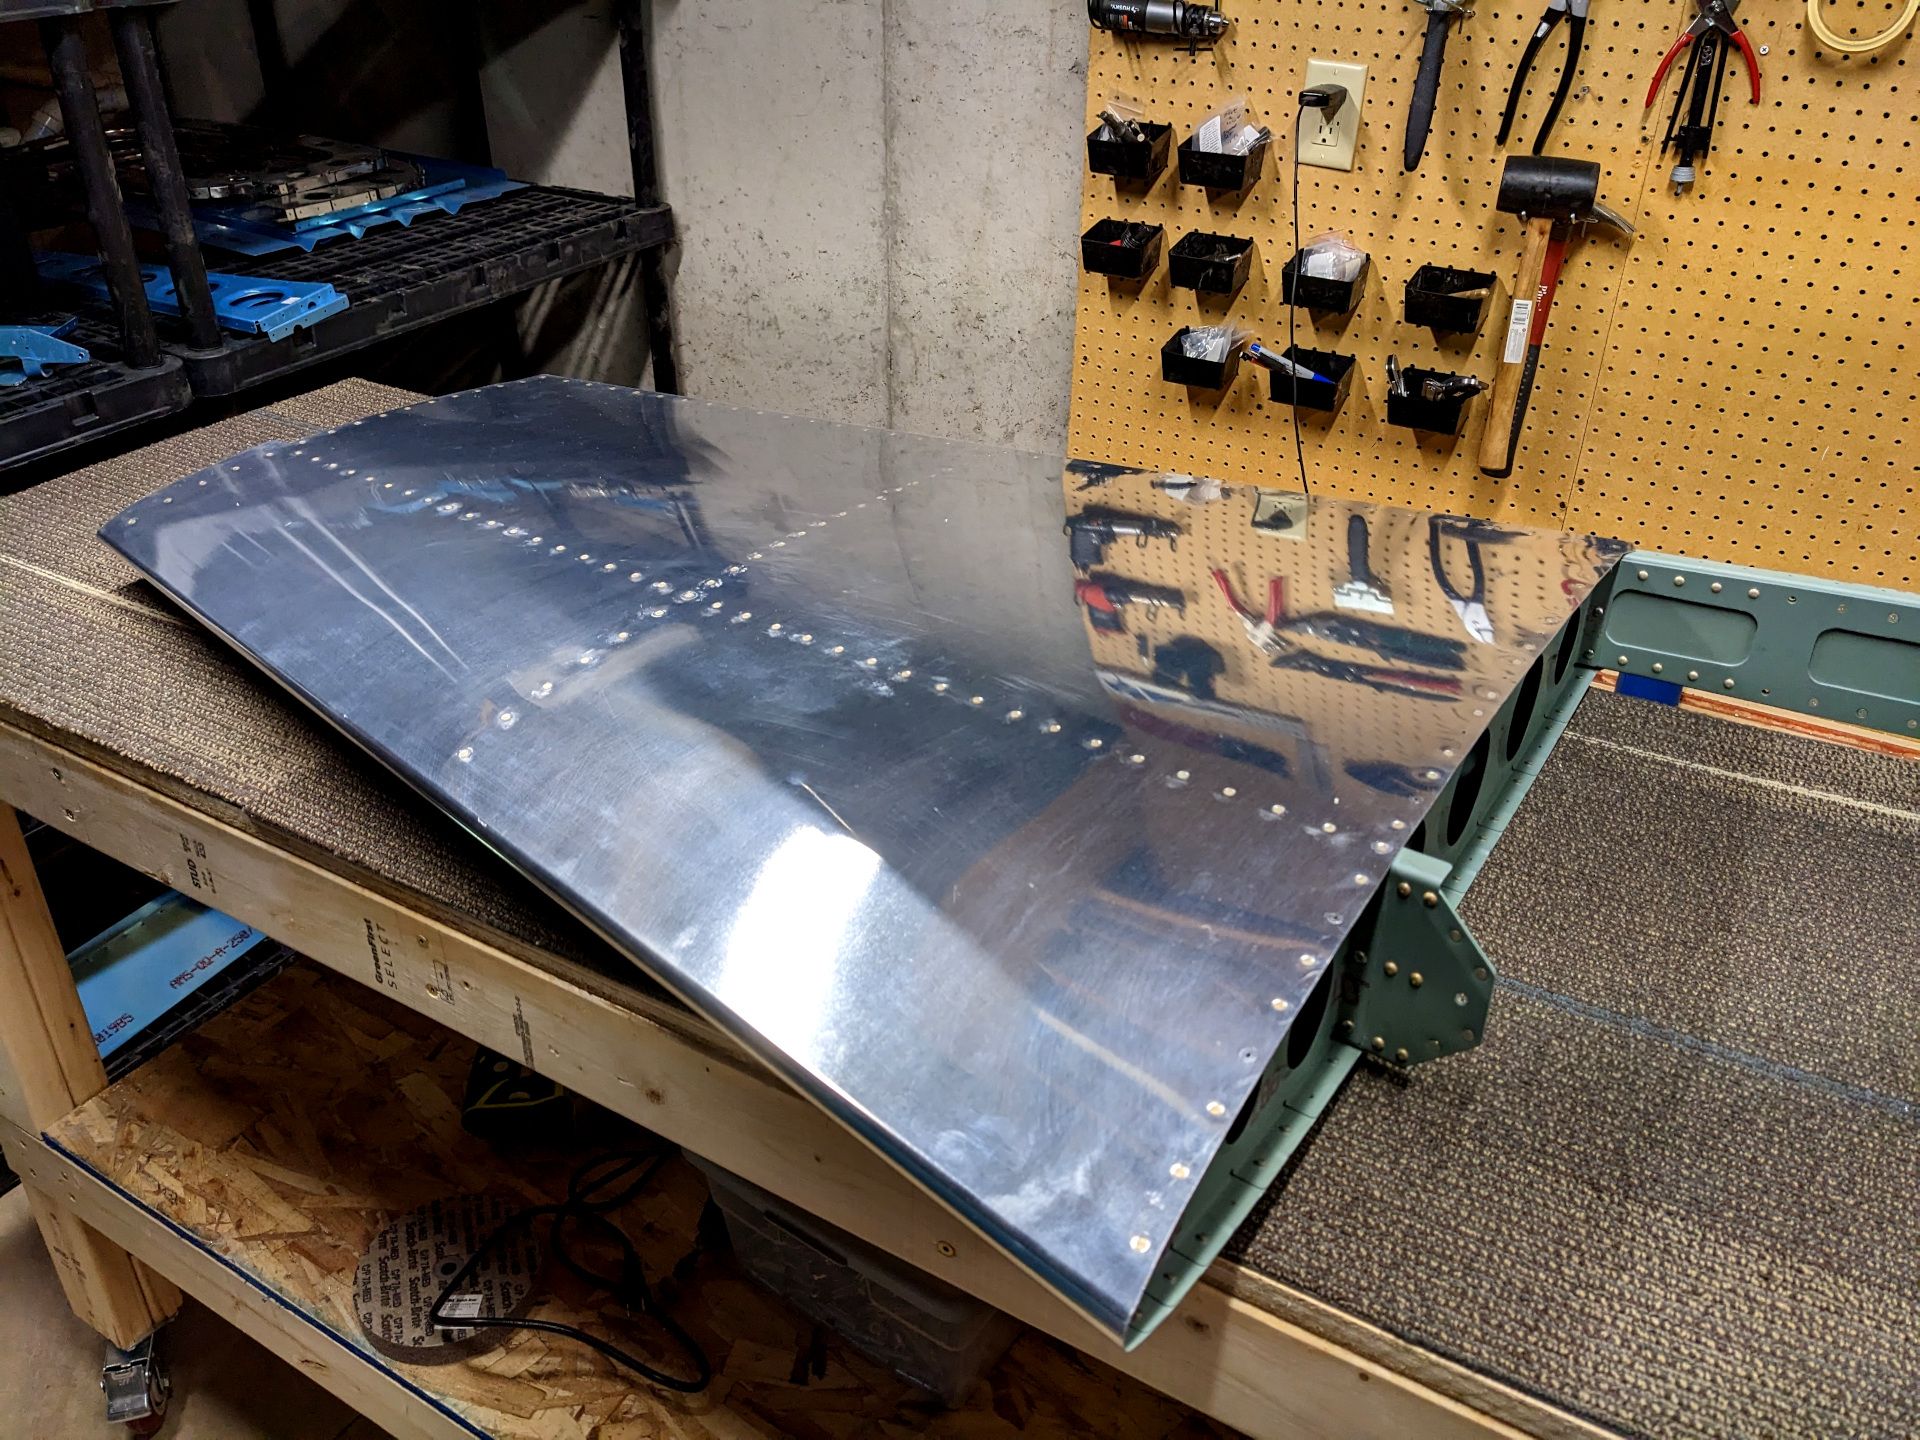 Vertical stabilizer for an airplane sitting on a workbench. The aluminum is bare.